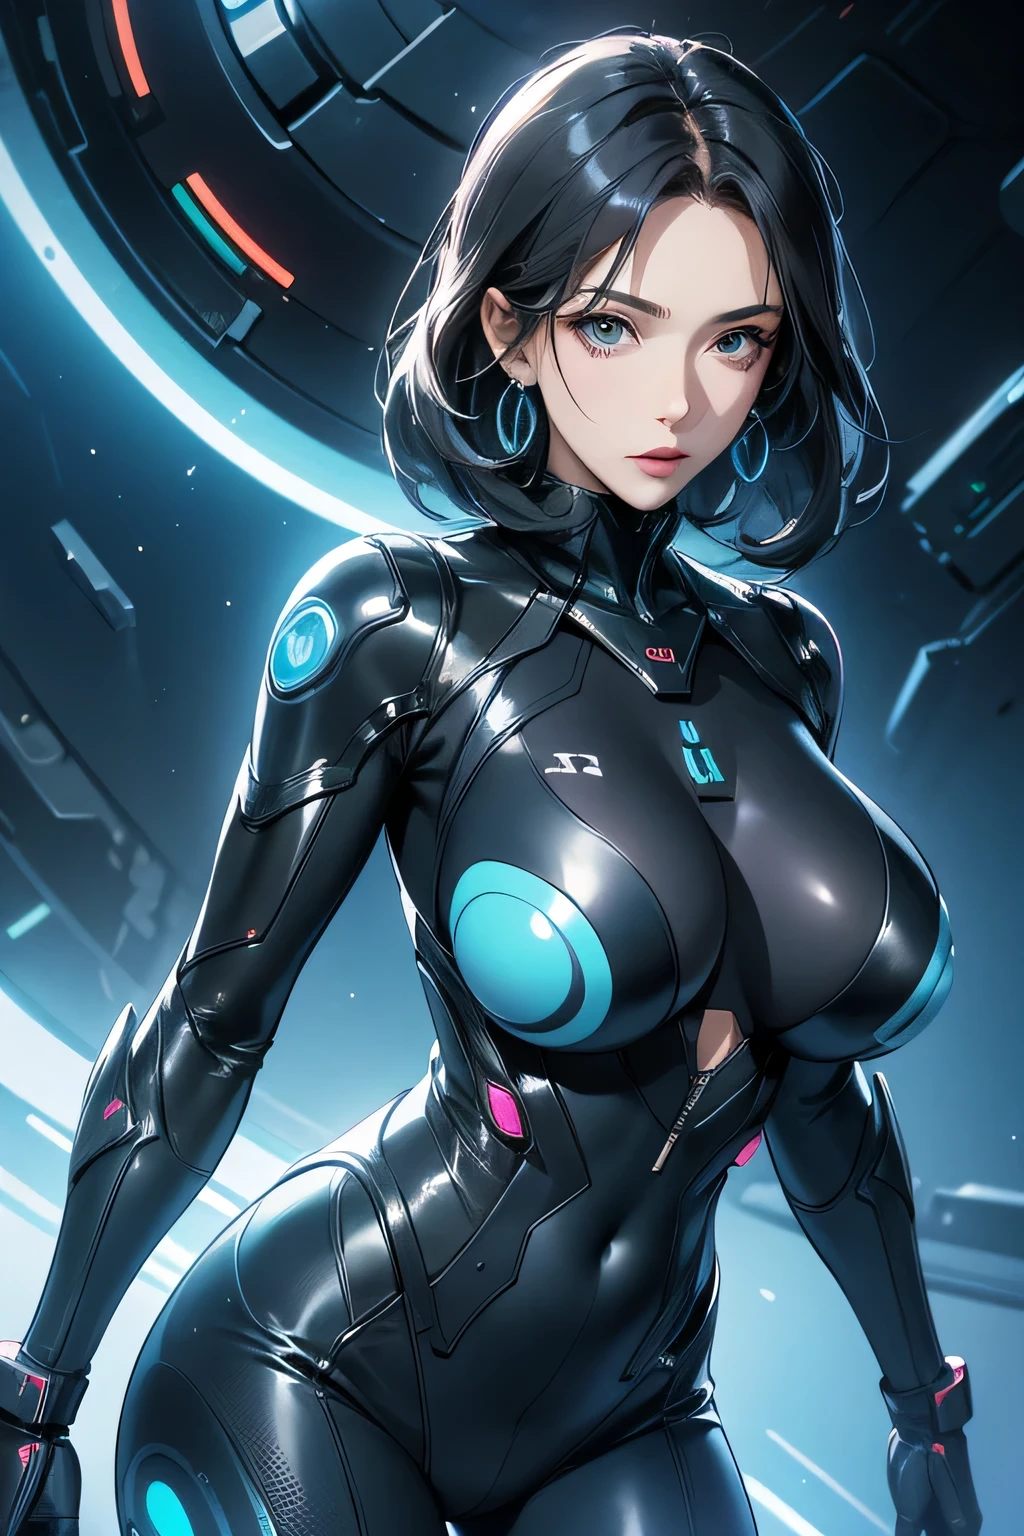 Milf, woman in a futuristic suit, highly detailed face, cool, mom, tomboy, very large breast, (Milf), mature face, (mature female), cybersuit, anime girl wearing tight suit, milfication, Elegant body, navel focus, naked body, gloves, earrings, science fiction, female protagonist, standing, volumetric light, detailed lighting, (detailed textures), oppai cyberpunk, biomechanical oppai, masterpiece, best quality eyes, sci-fi background, futuristic landscape, low angle, (smooth surface), (simple body suit)
